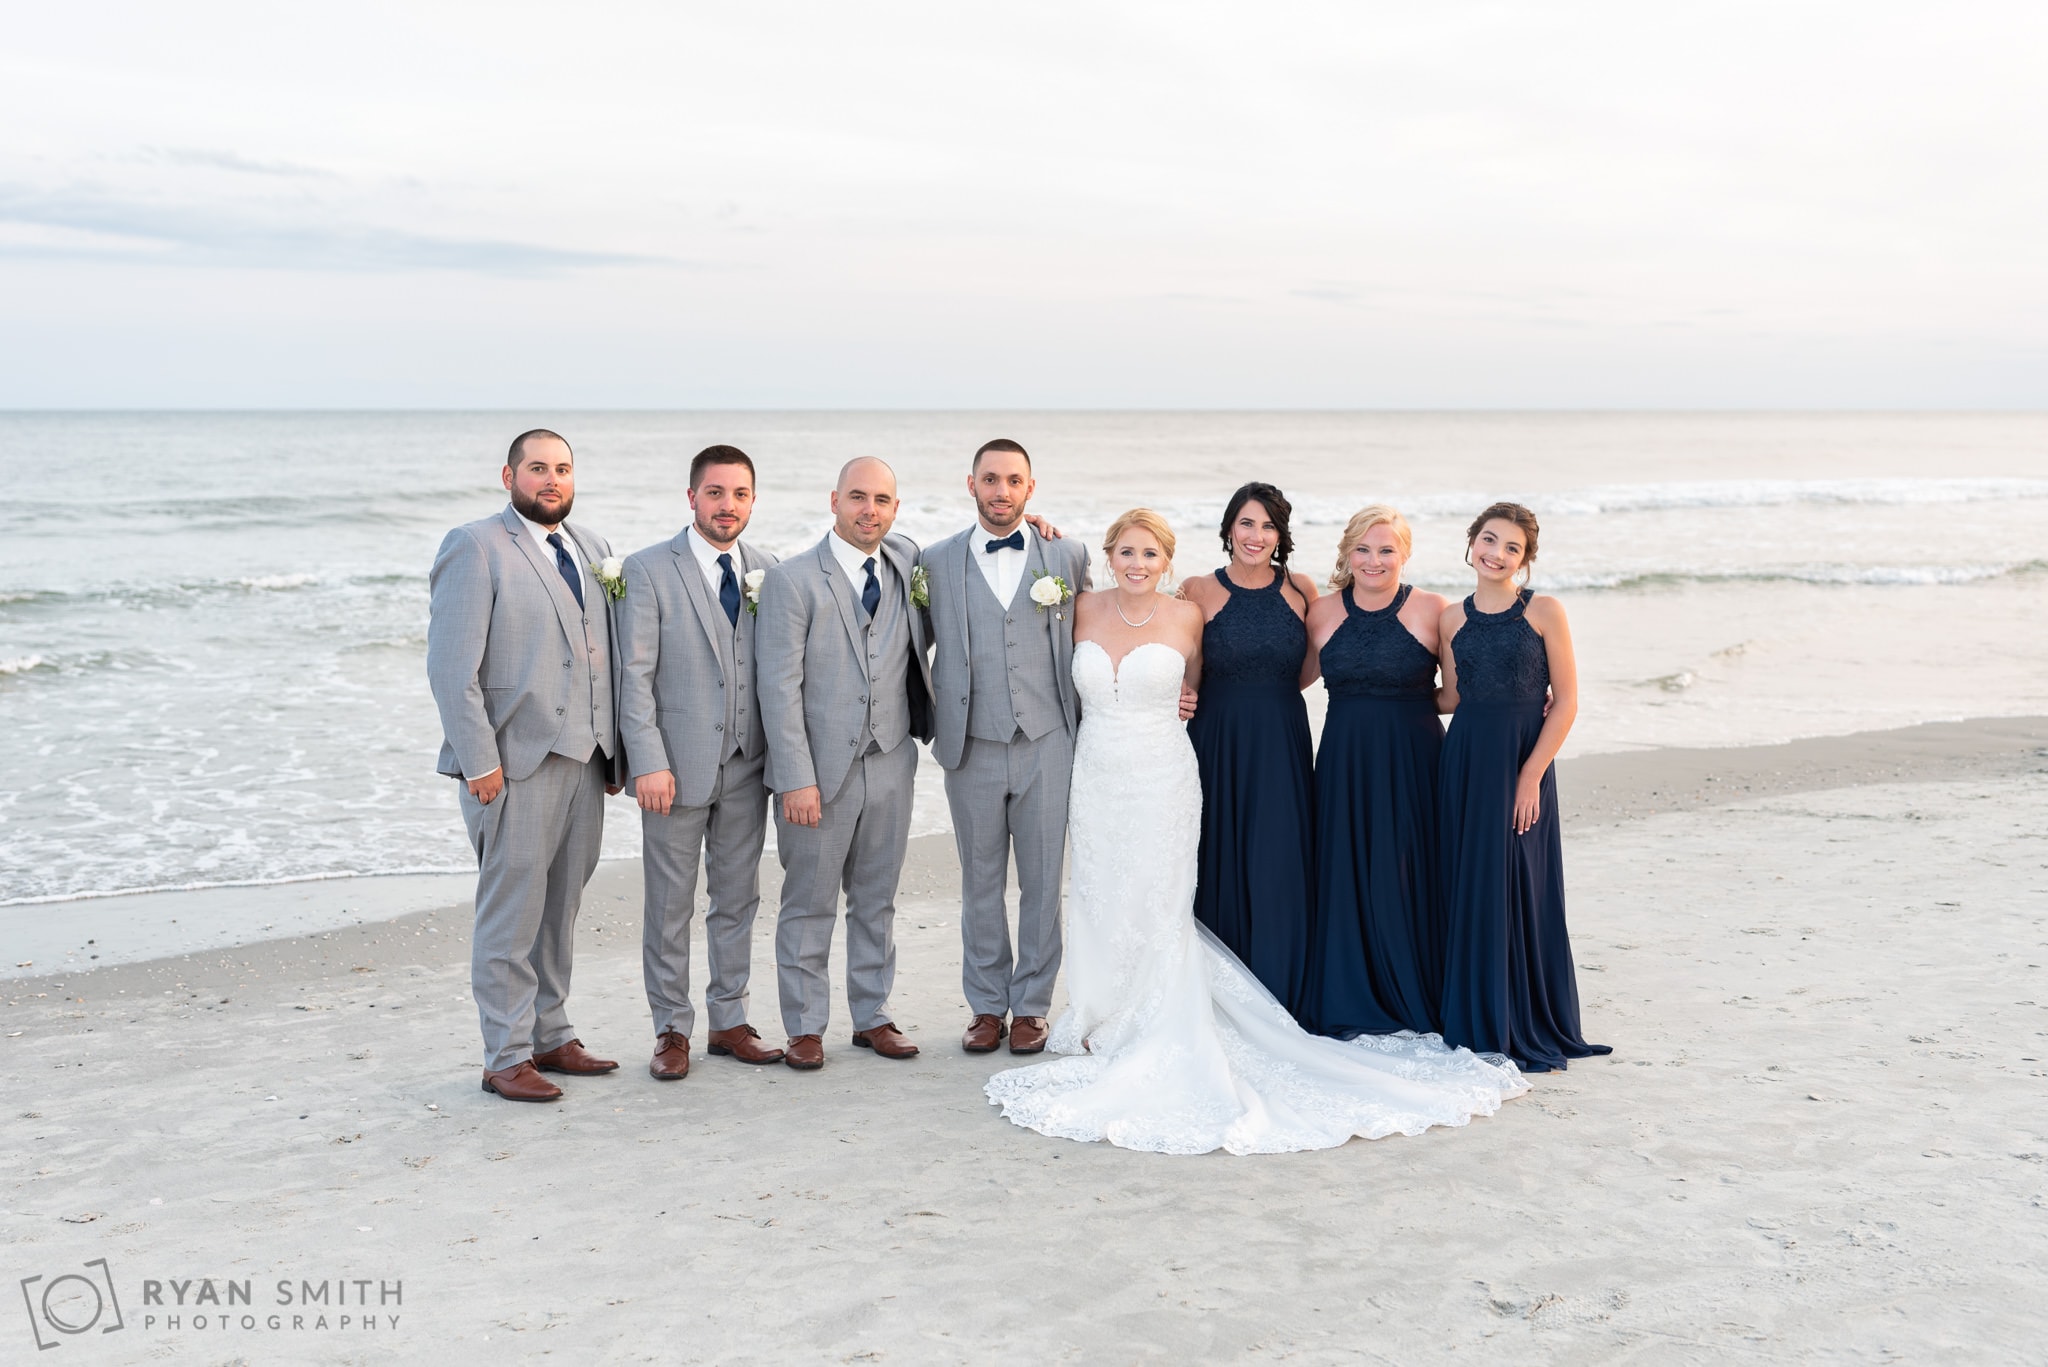 Bridal party in front of the ocean - 21 Main Events - North Myrtle Beach